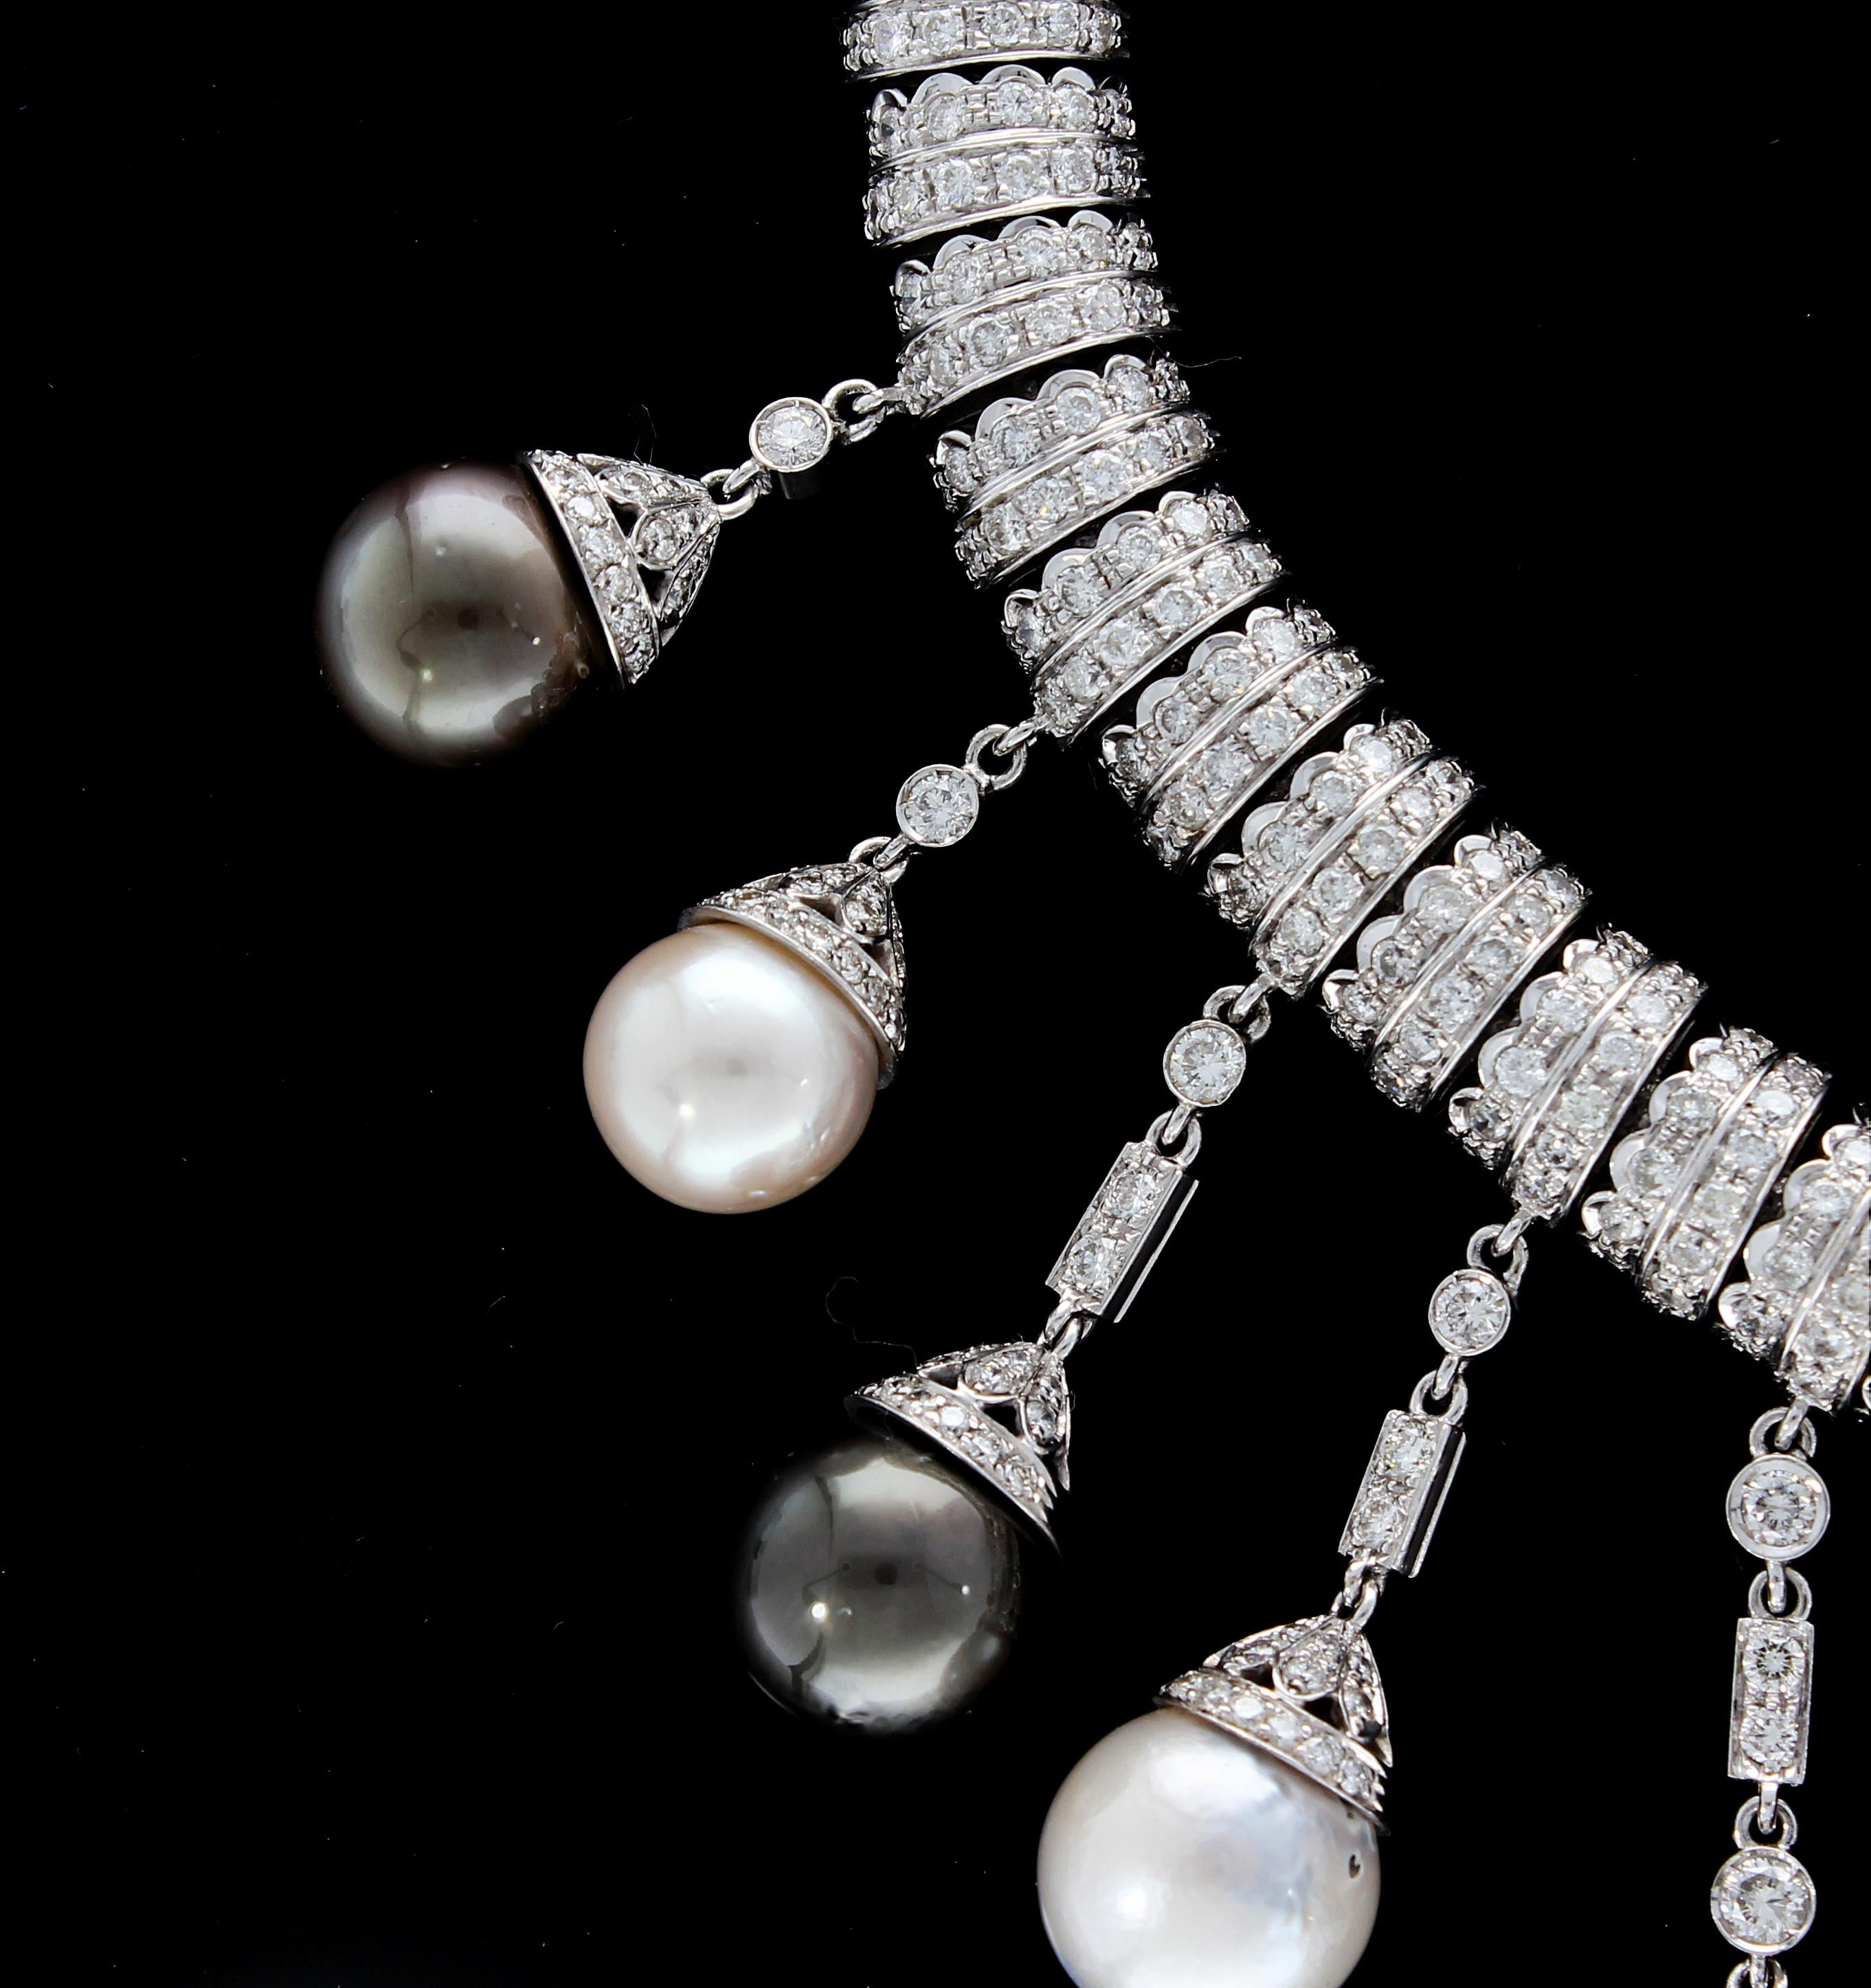 Necklace White Gold and Diamonds, Pendants with White and Black Pearls S.S. For Sale 5